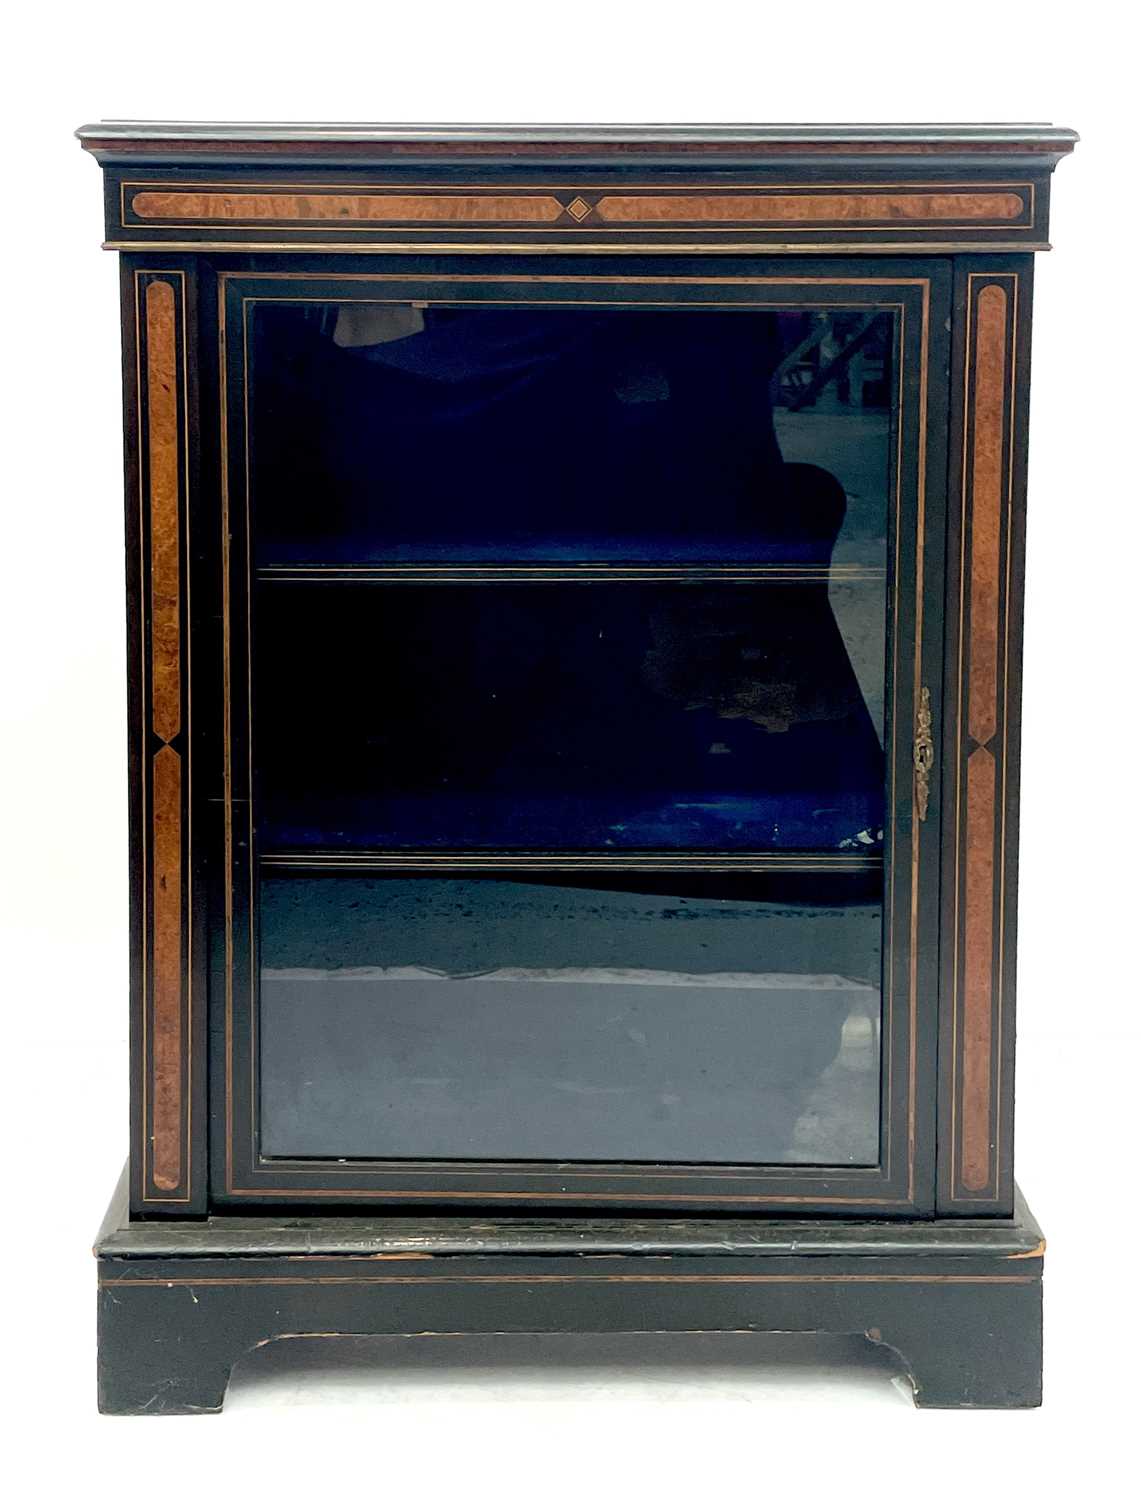 A Victorian ebonised walnut inlaid pier cabinet with brass mounts and boxwood stringing.